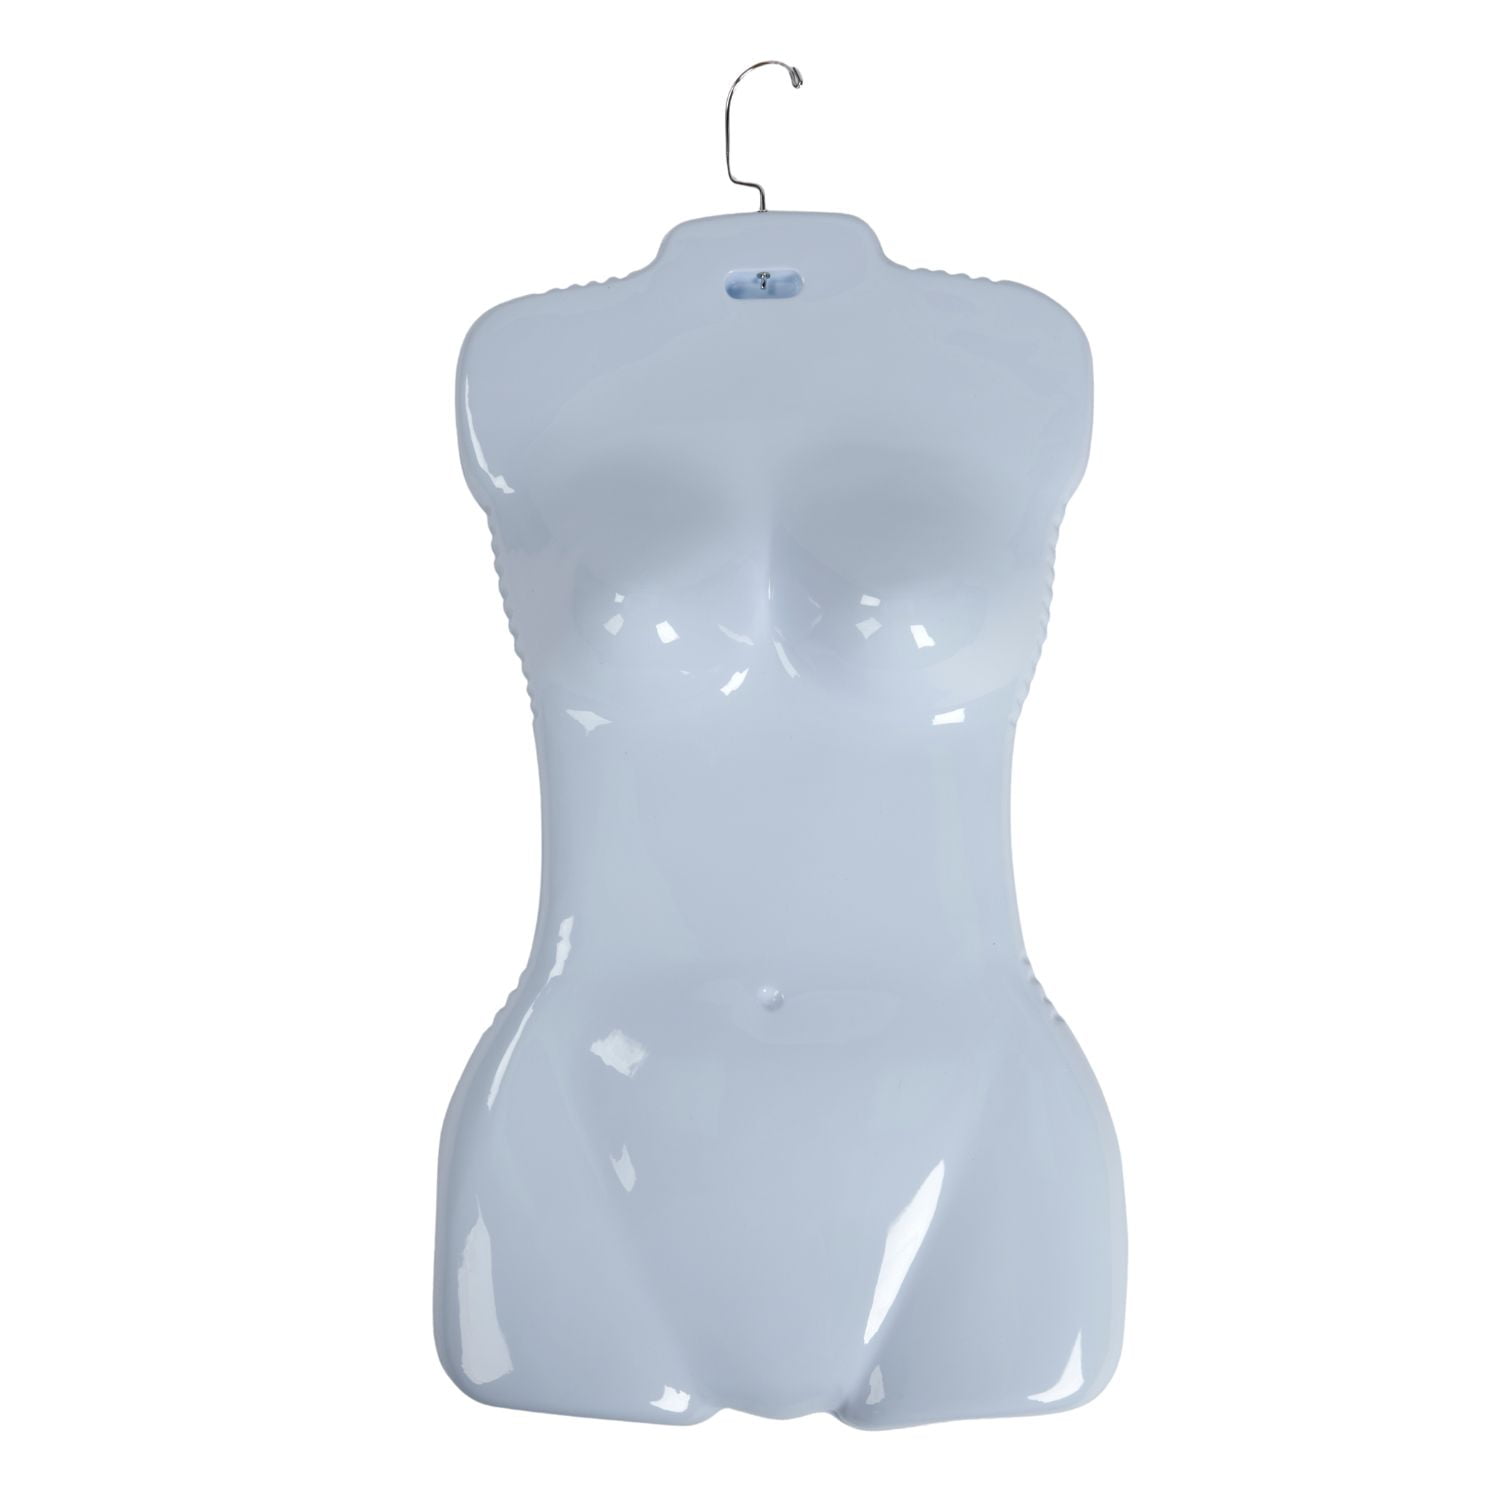 Molded Woman's Shirt Torso Form Hanging Female Mannequin White Fits 5 to 10 